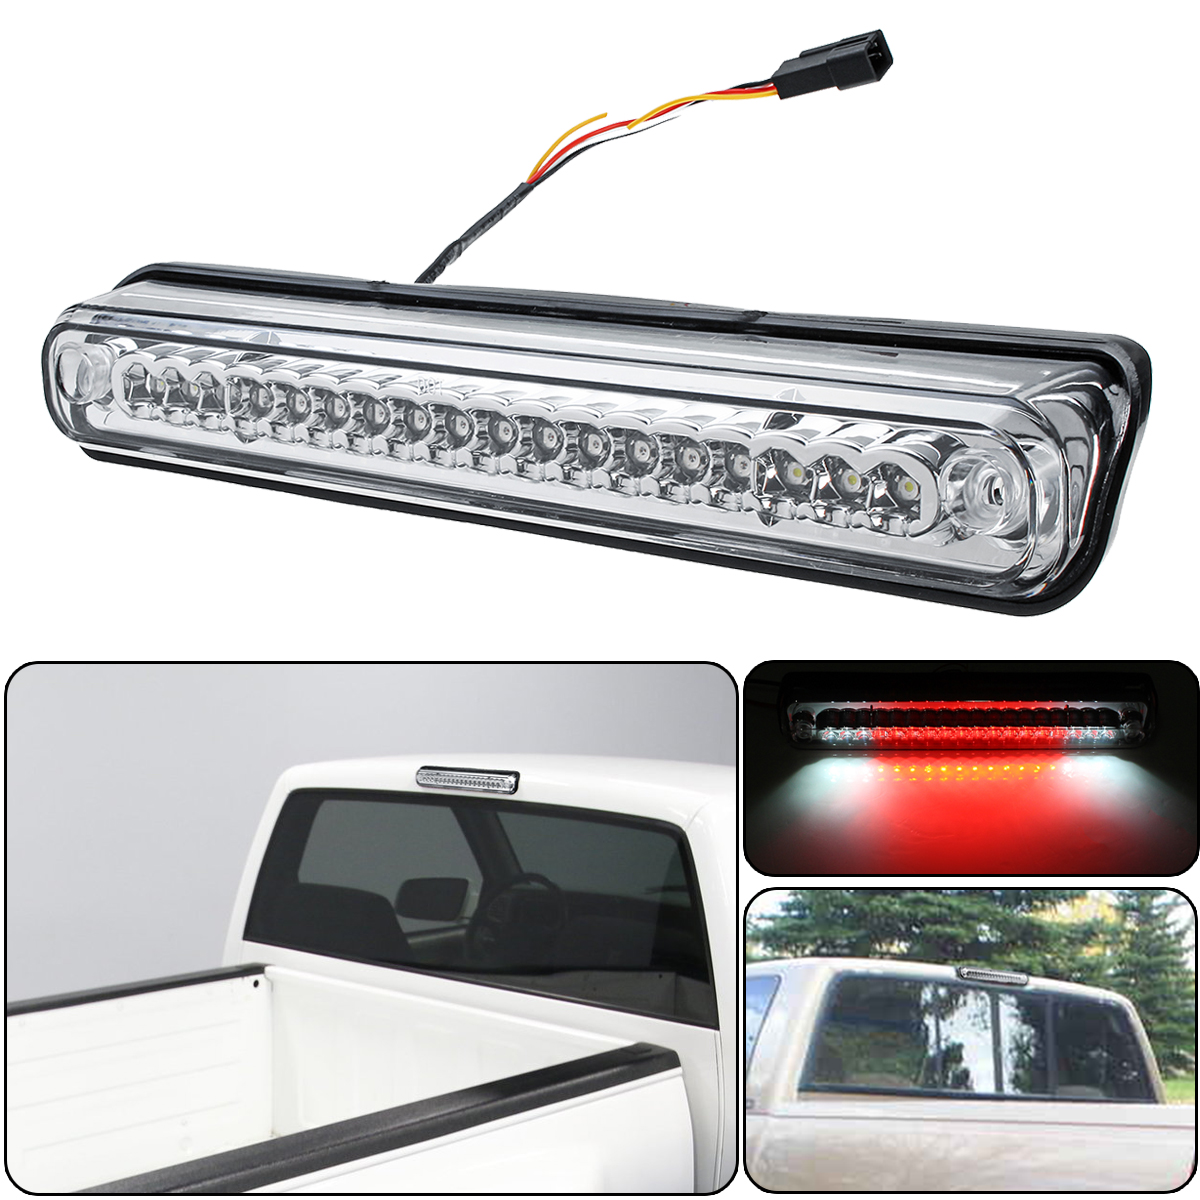 

LED High Mount Stop Lamp Third 3rd Brake Light Clear Shell for Chevy GMC C/K 1500 2500 3500 1988-1998